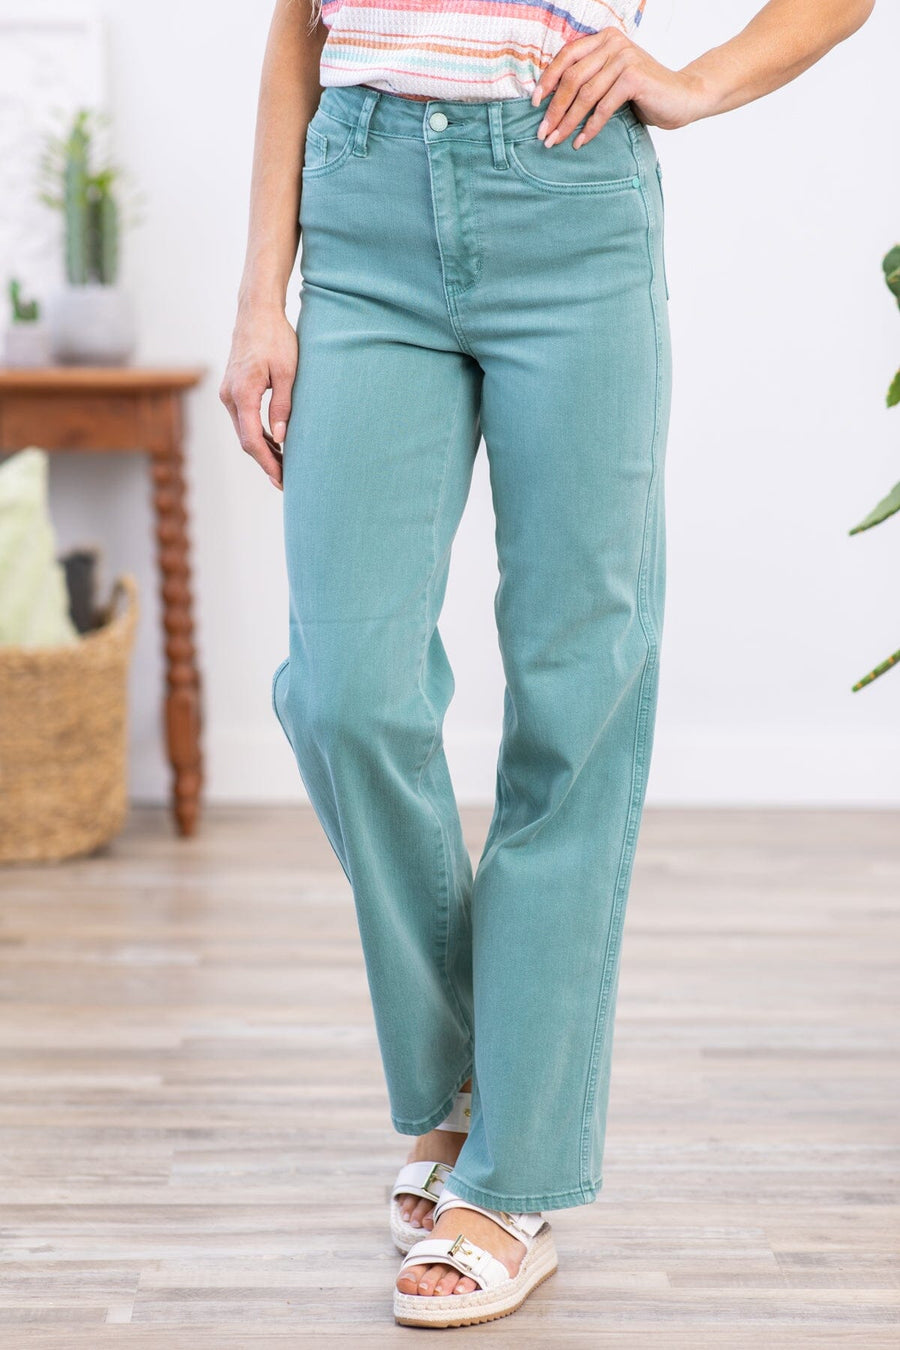 Judy Blue Turquoise Bootcut Jeans - Filly Flair